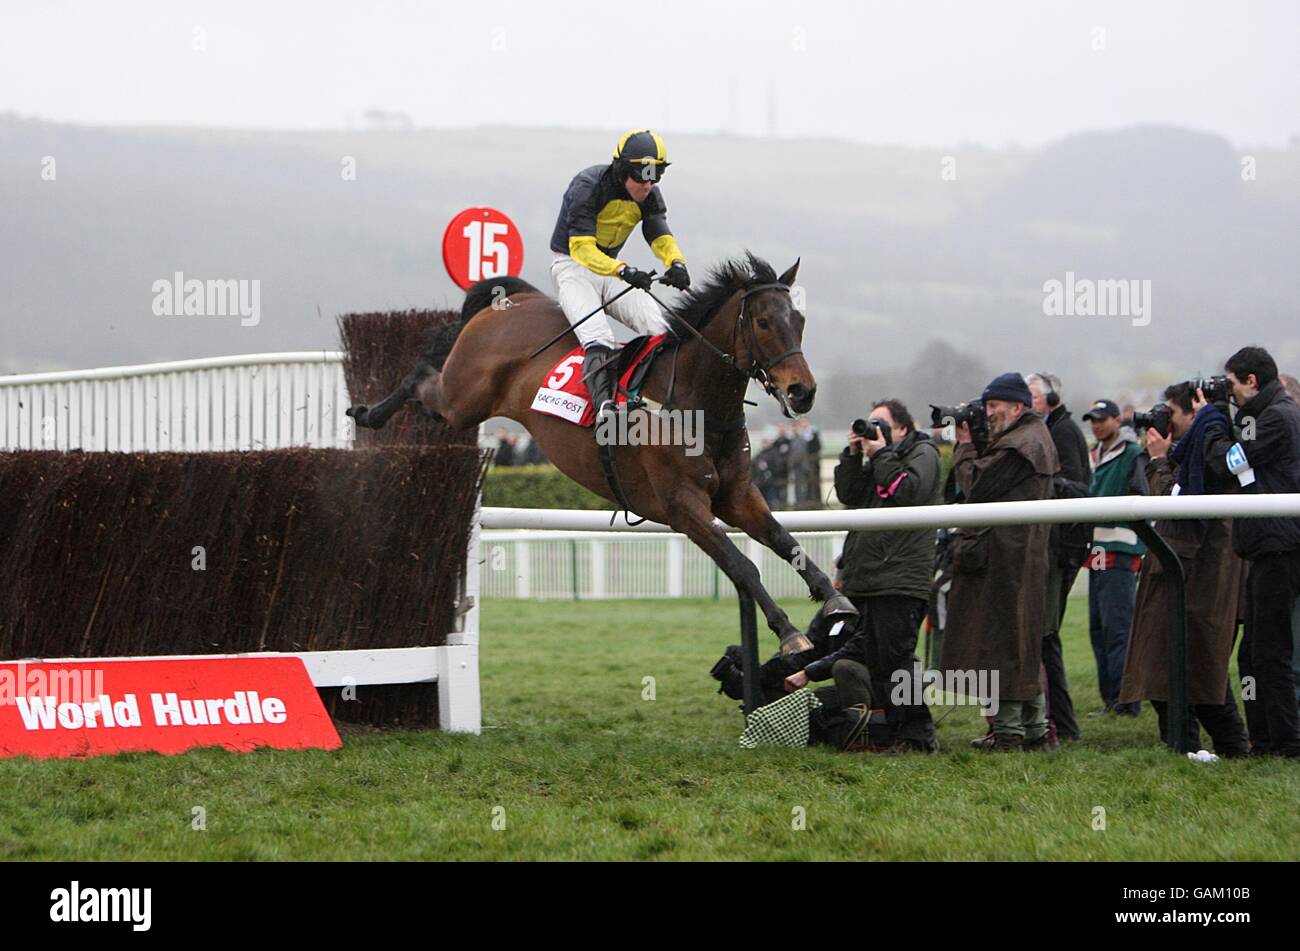 Jockey David Elsworth on Mister McGoldrick safely jumps the last fence to go on and win the Racing Post Plate Handicap Chase during the Cheltenham Festival Stock Photo